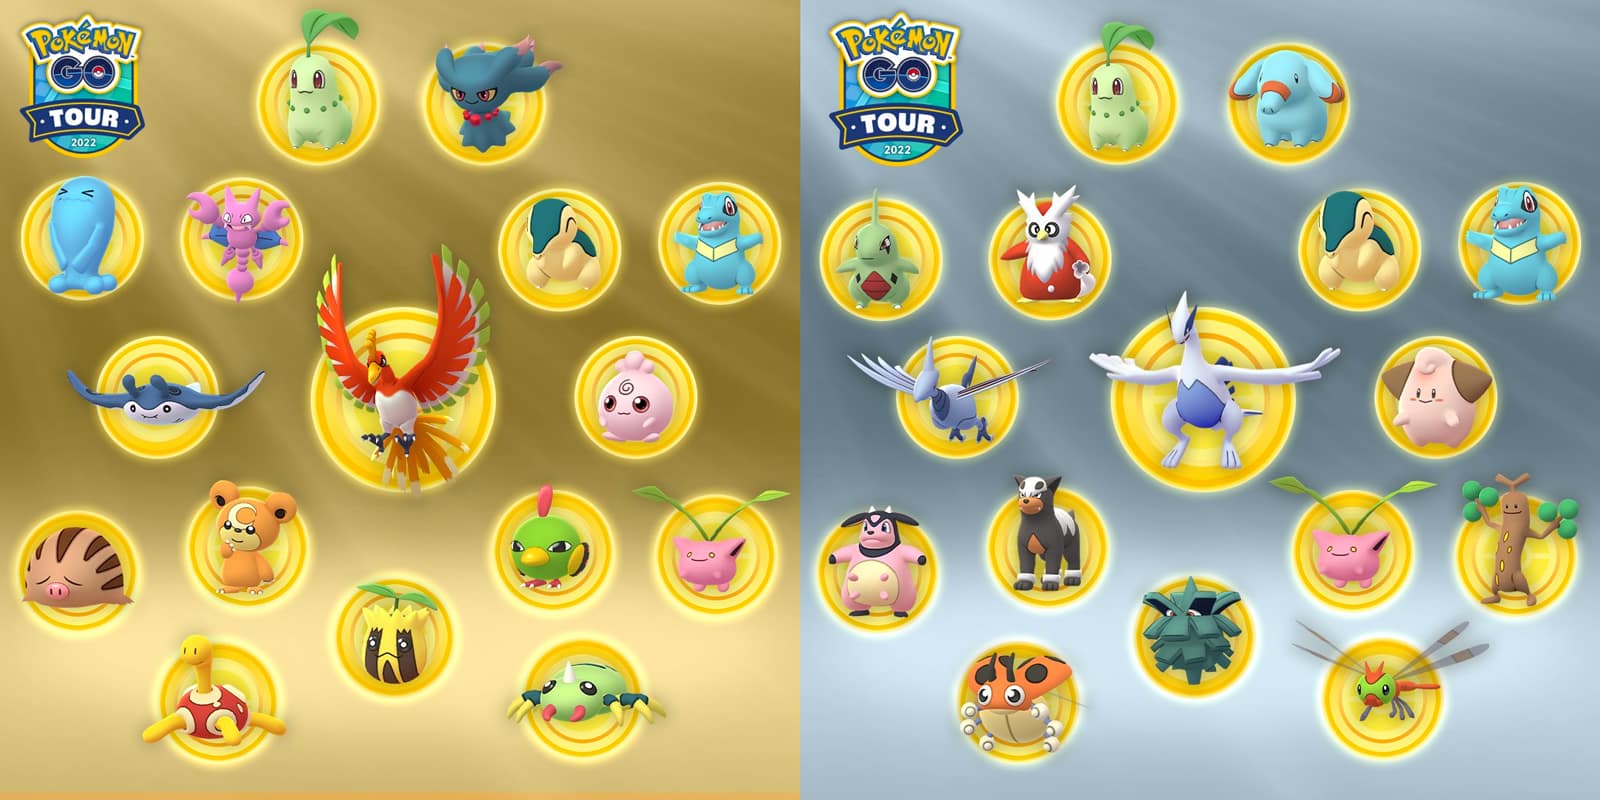 The Gold and Silver exclusives in Pokemon Go Tour Johto